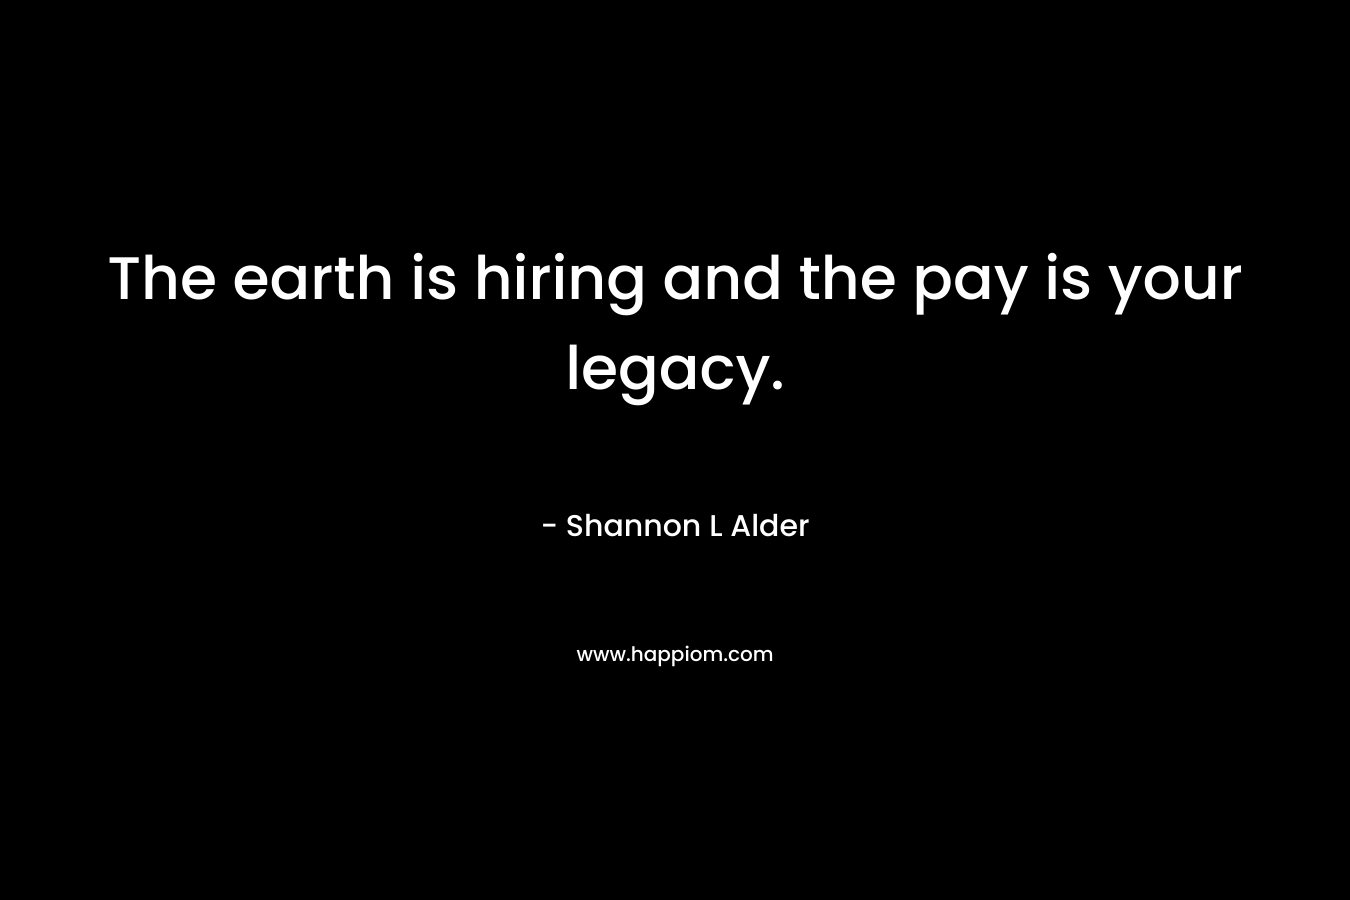 The earth is hiring and the pay is your legacy.